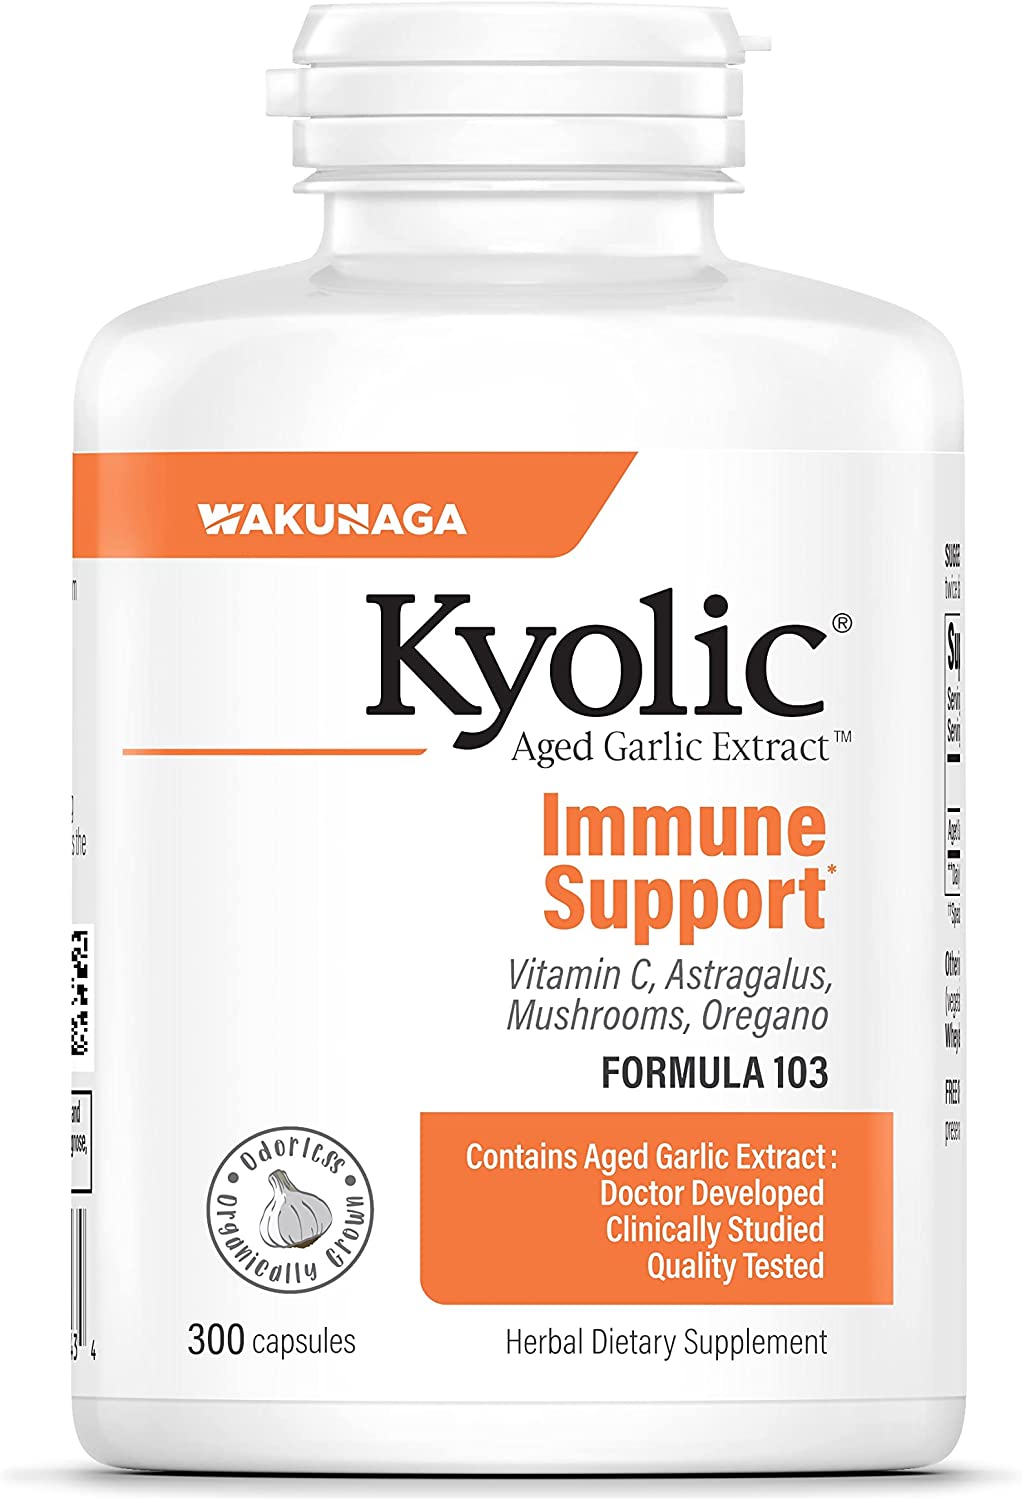 Kyolic Aged Garlic Extract lmmune Support - 300 Tablet-3